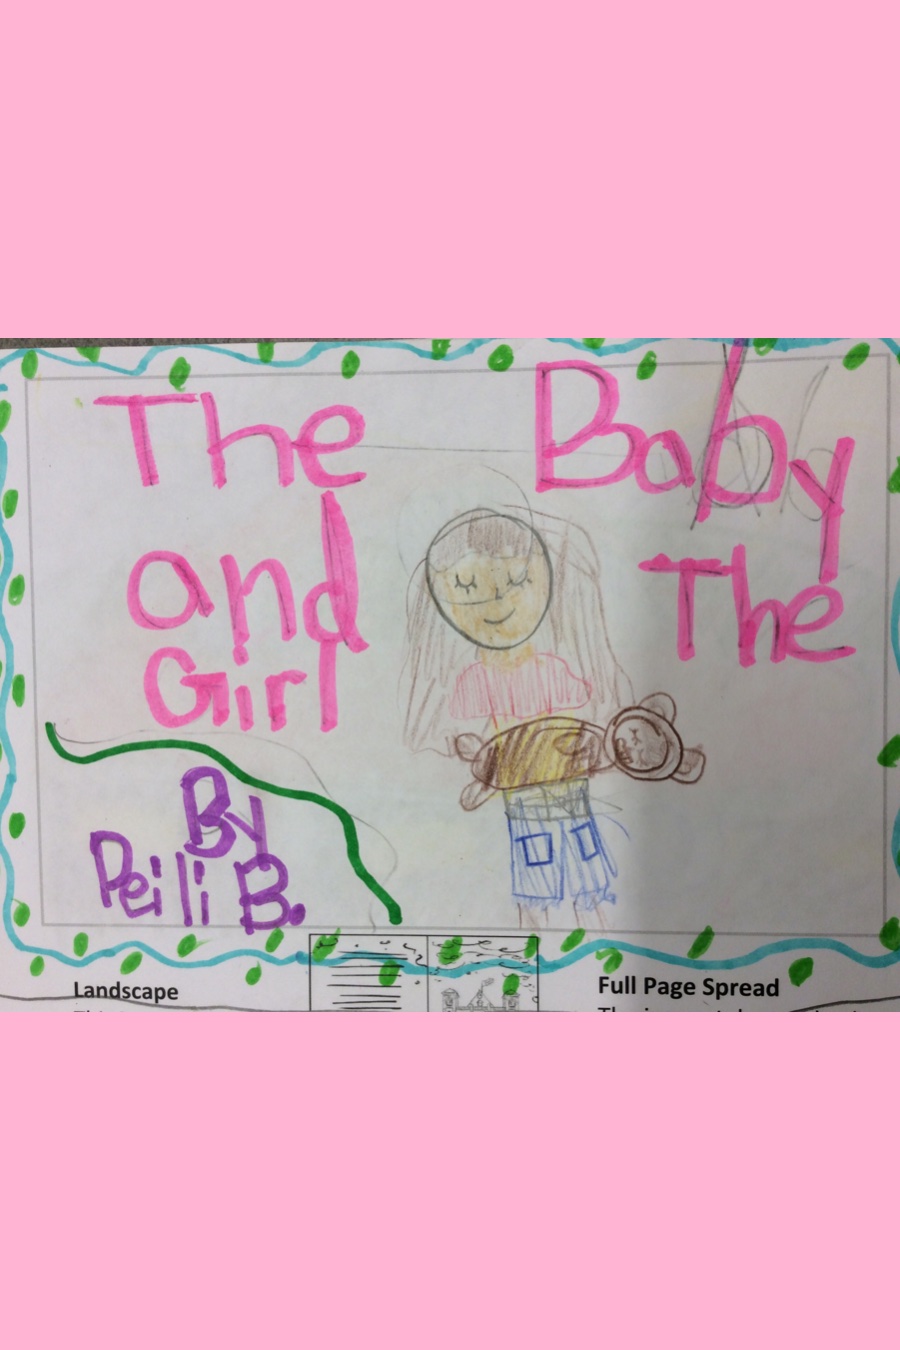 The Baby and the Girl by Peili B